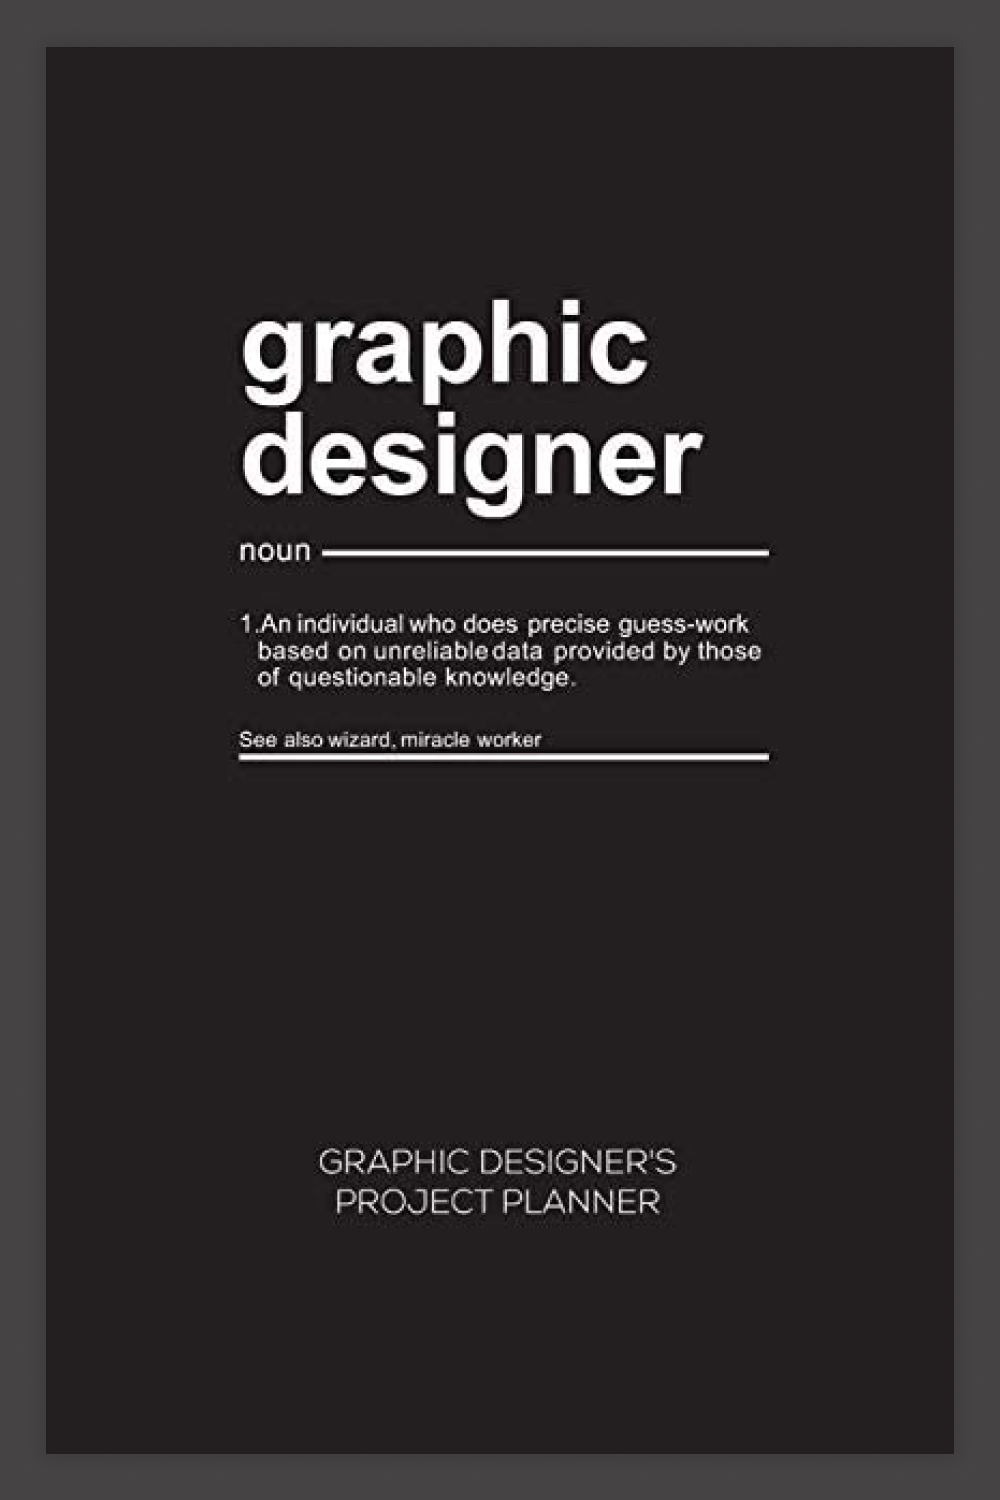 The cover of the Graphic Designer's Project Planner.